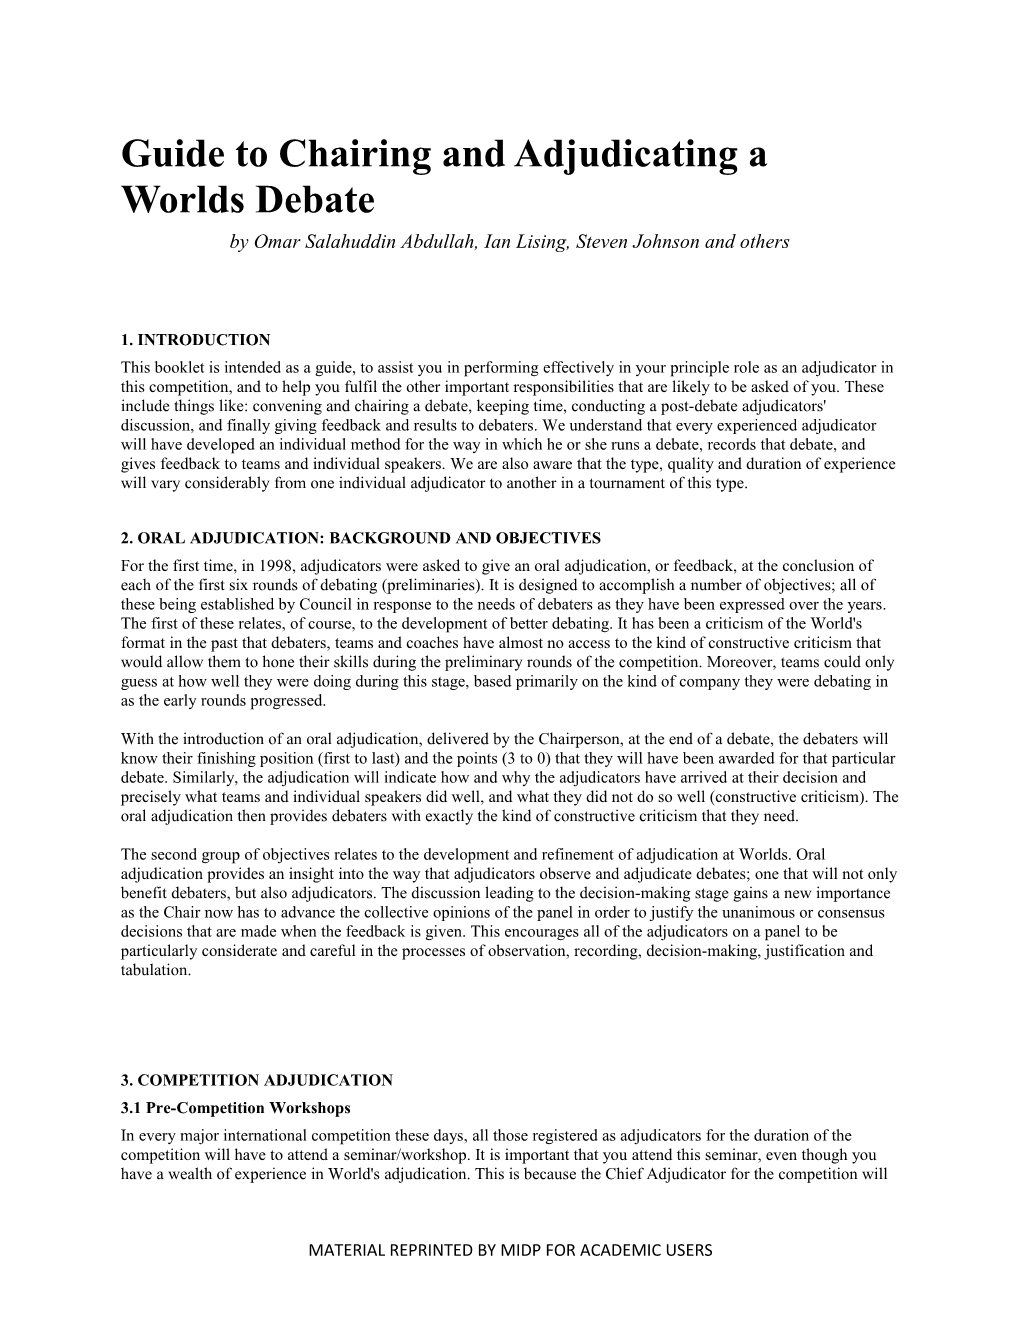 Guide to Chairing and Adjudicating a Worlds Debate